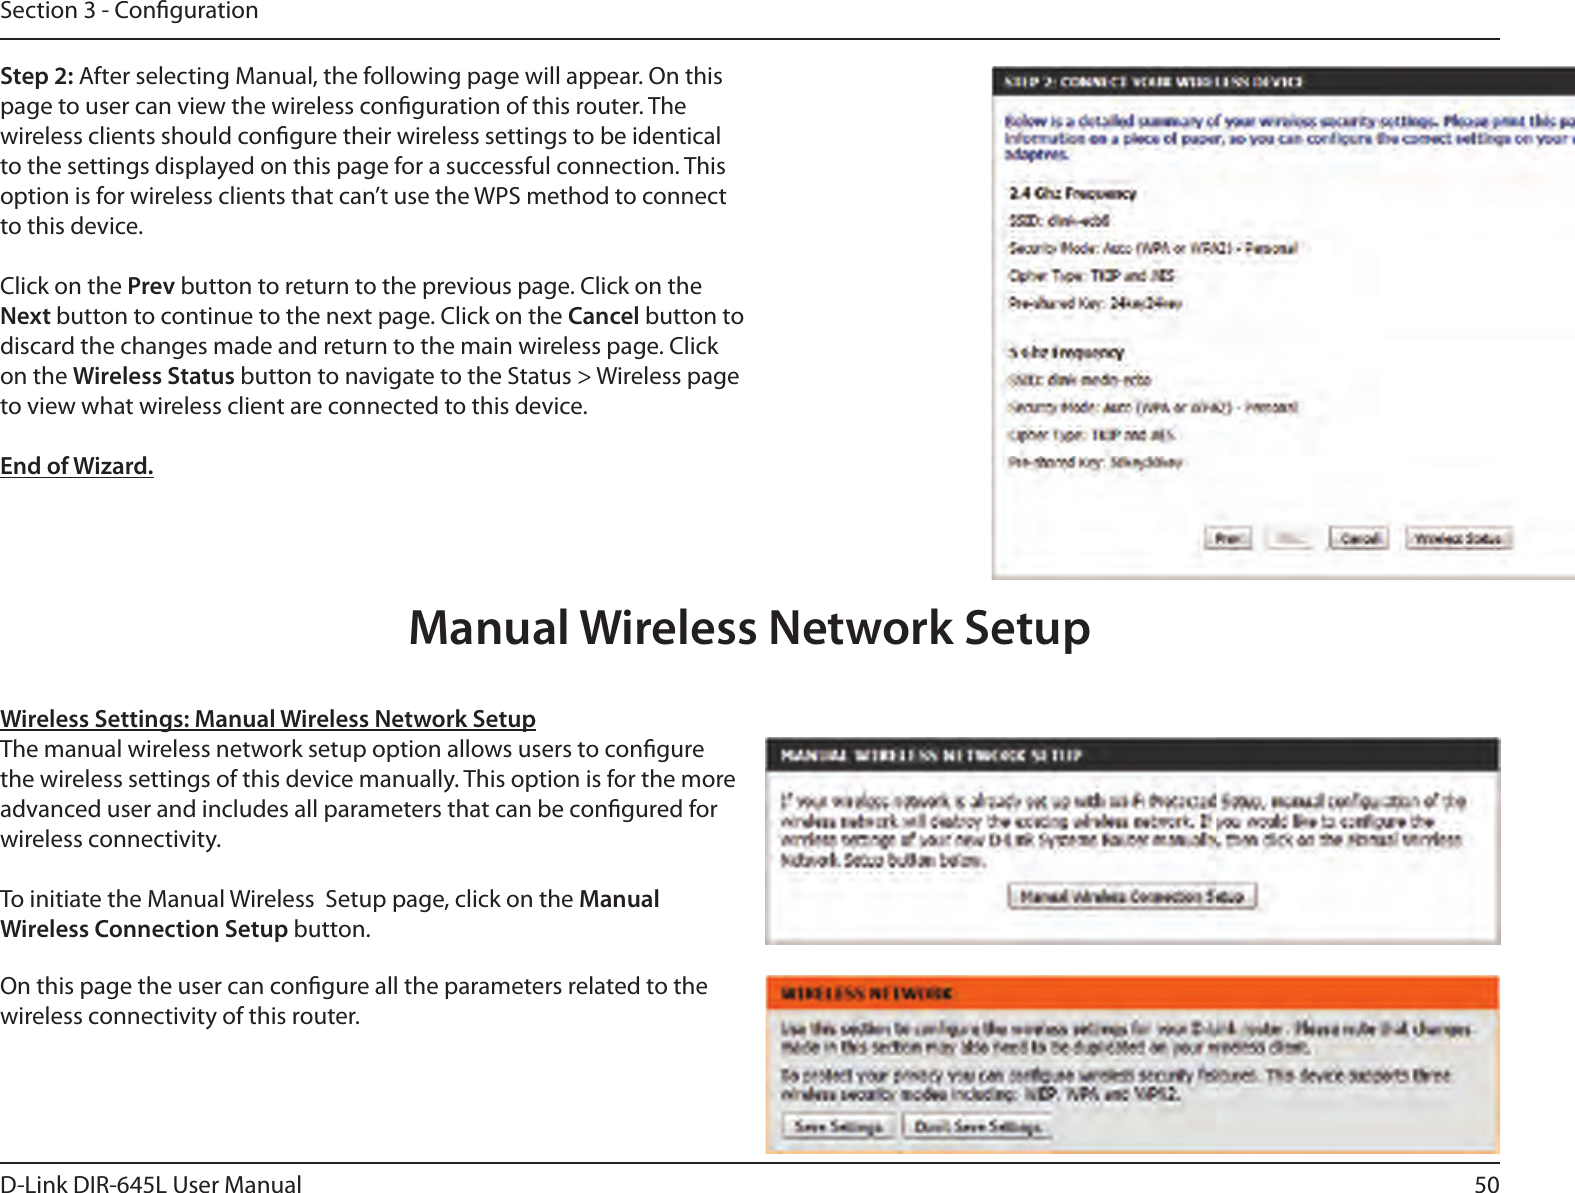 50D-Link DIR-645L User ManualSection 3 - CongurationStep 2: After selecting Manual, the following page will appear. On this page to user can view the wireless conguration of this router. The wireless clients should congure their wireless settings to be identical to the settings displayed on this page for a successful connection. This option is for wireless clients that can’t use the WPS method to connect to this device.Click on the Prev button to return to the previous page. Click on the Next button to continue to the next page. Click on the Cancel button to discard the changes made and return to the main wireless page. Click on the Wireless Status button to navigate to the Status &gt; Wireless page to view what wireless client are connected to this device.End of Wizard.Wireless Settings: Manual Wireless Network SetupThe manual wireless network setup option allows users to congure the wireless settings of this device manually. This option is for the more advanced user and includes all parameters that can be congured for wireless connectivity.To initiate the Manual Wireless  Setup page, click on the Manual Wireless Connection Setup button.On this page the user can congure all the parameters related to the wireless connectivity of this router.Manual Wireless Network Setup